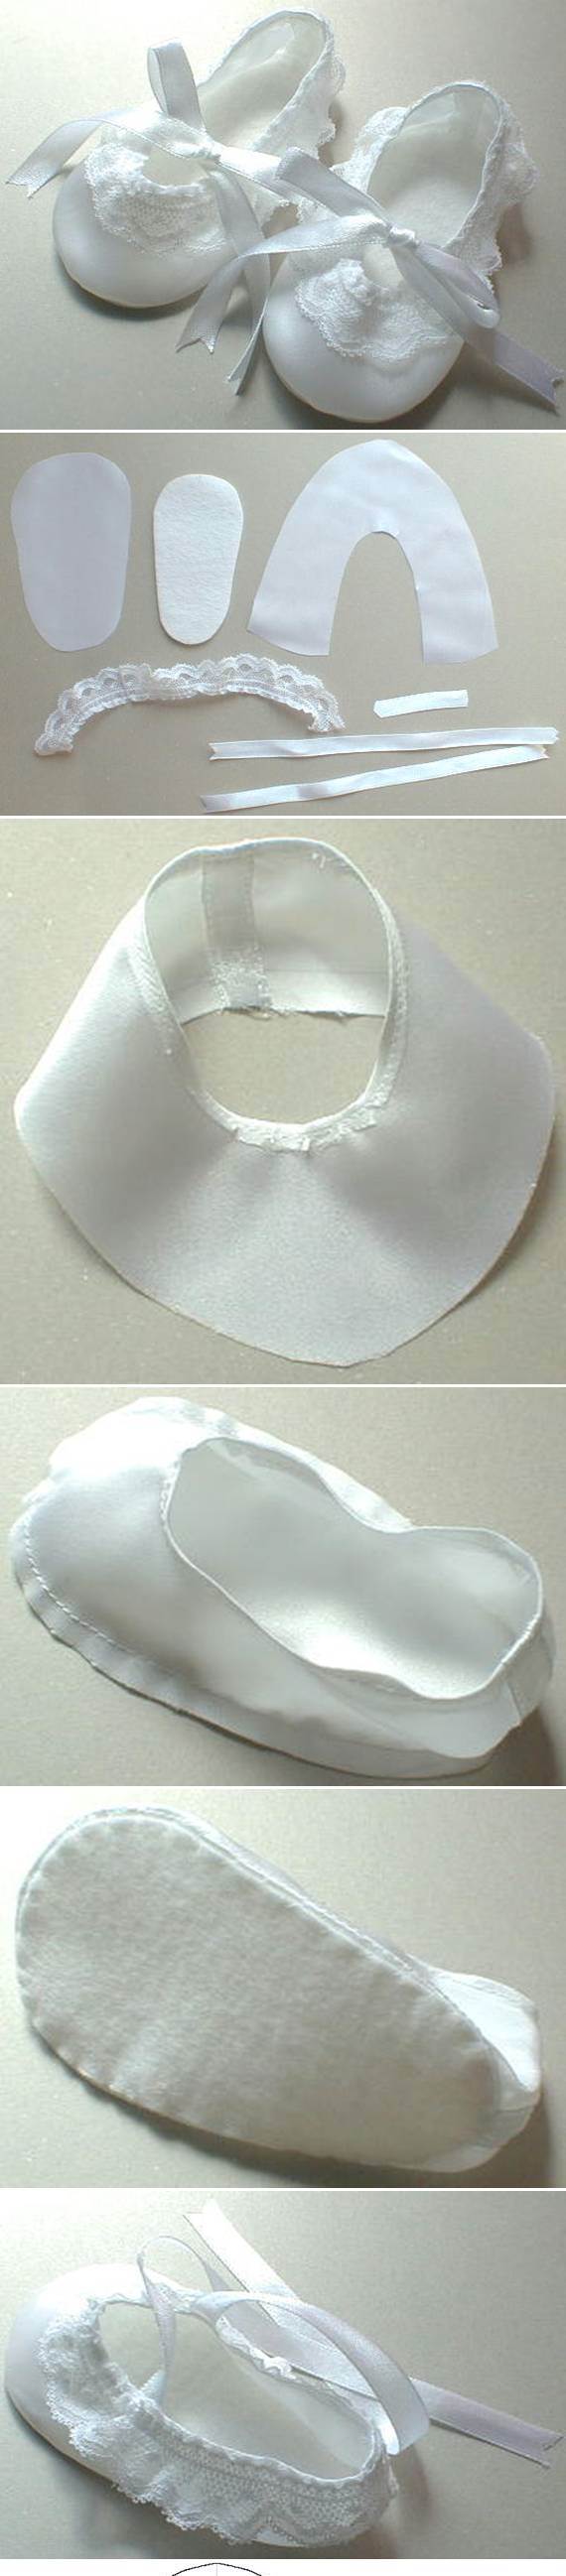 DIY-Baby-Lace-Shoes